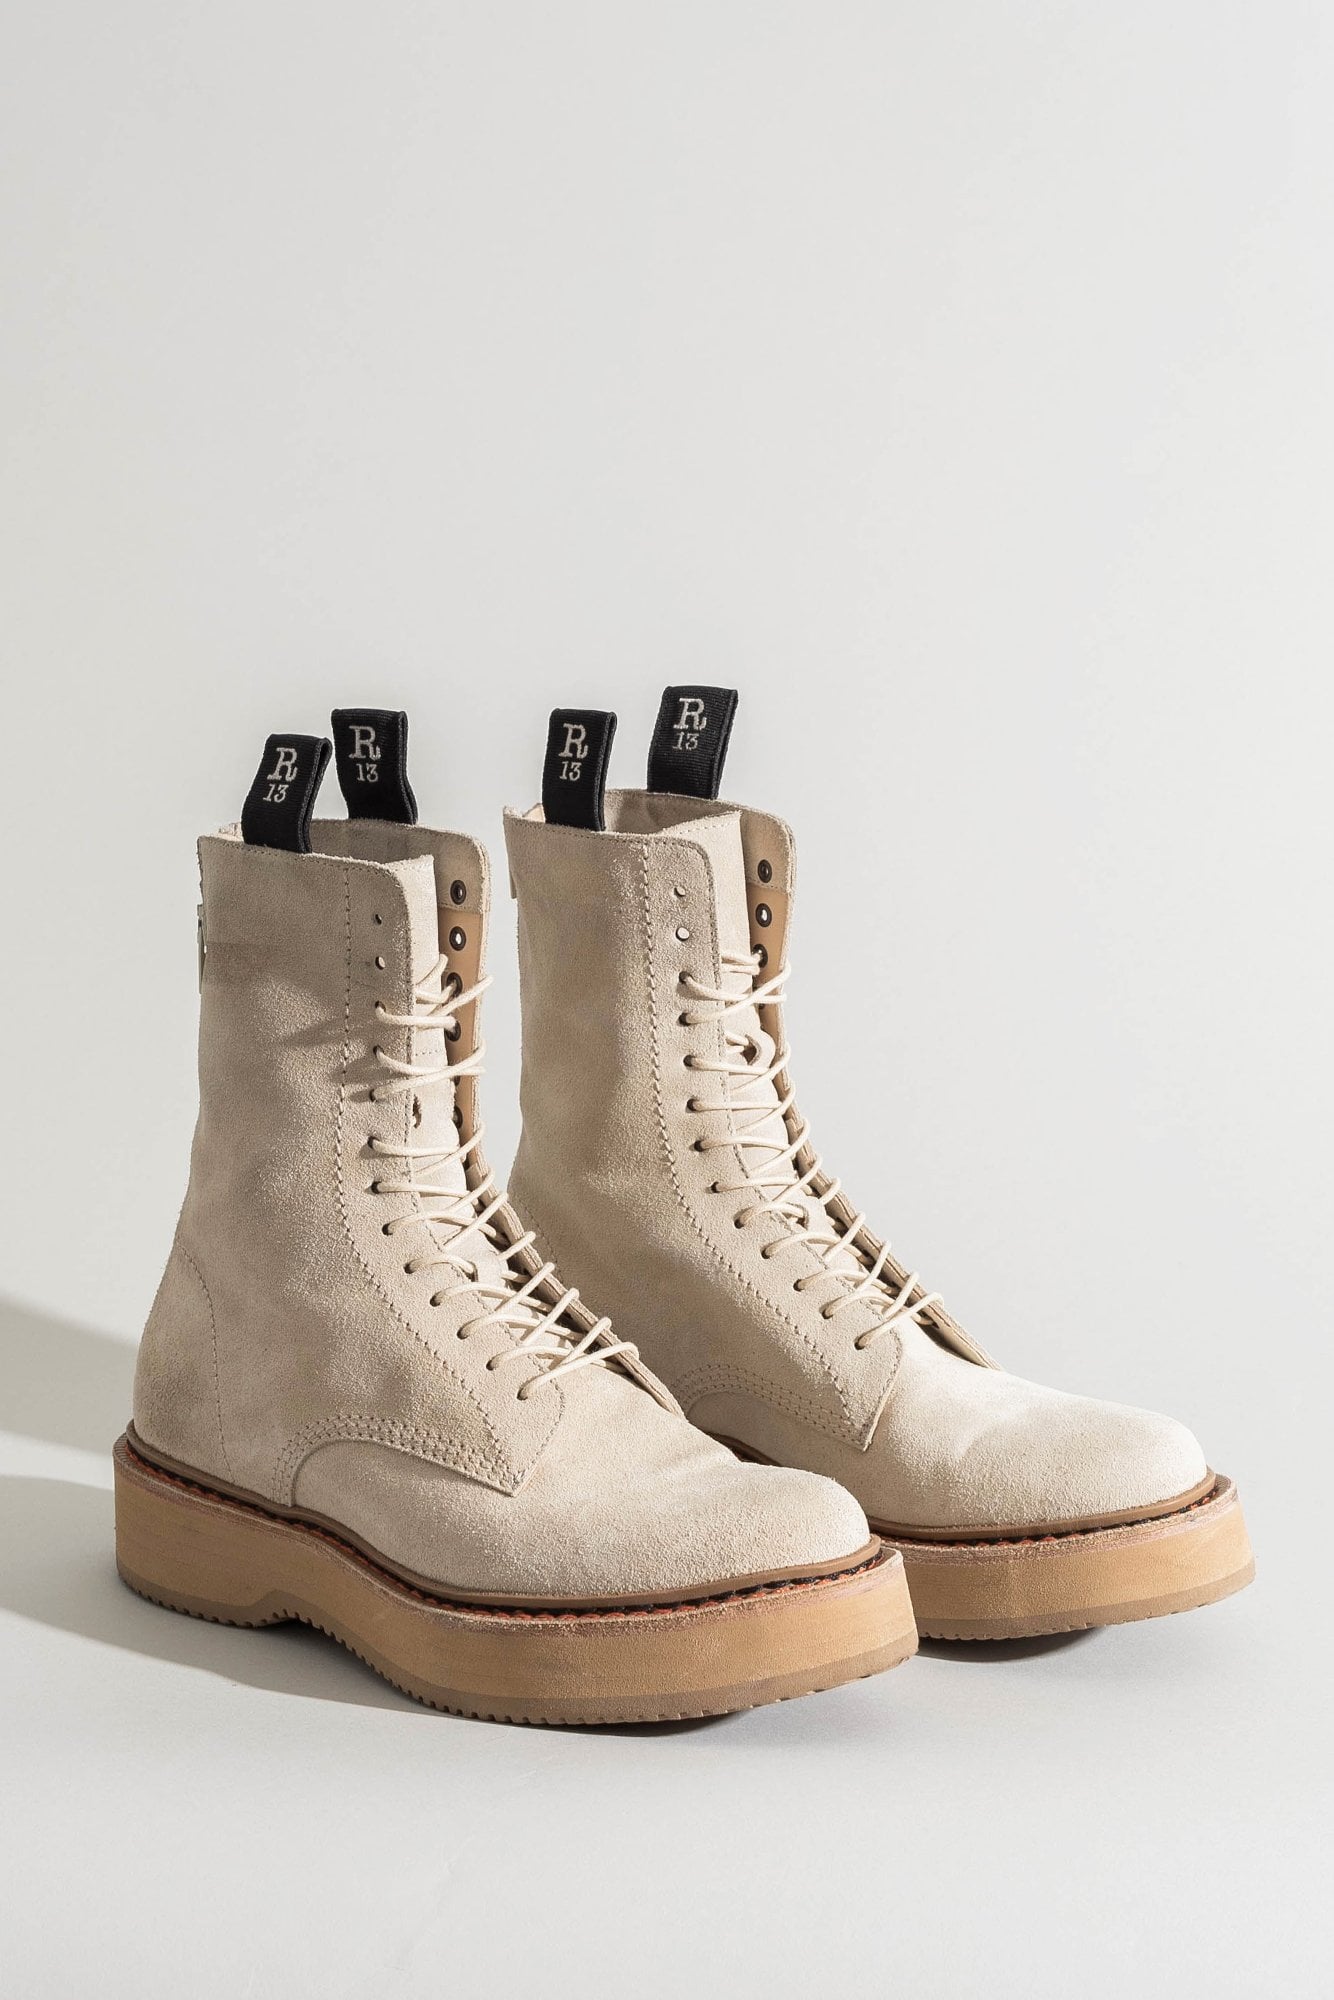 SINGLE STACK BOOT - KHAKI SUEDE